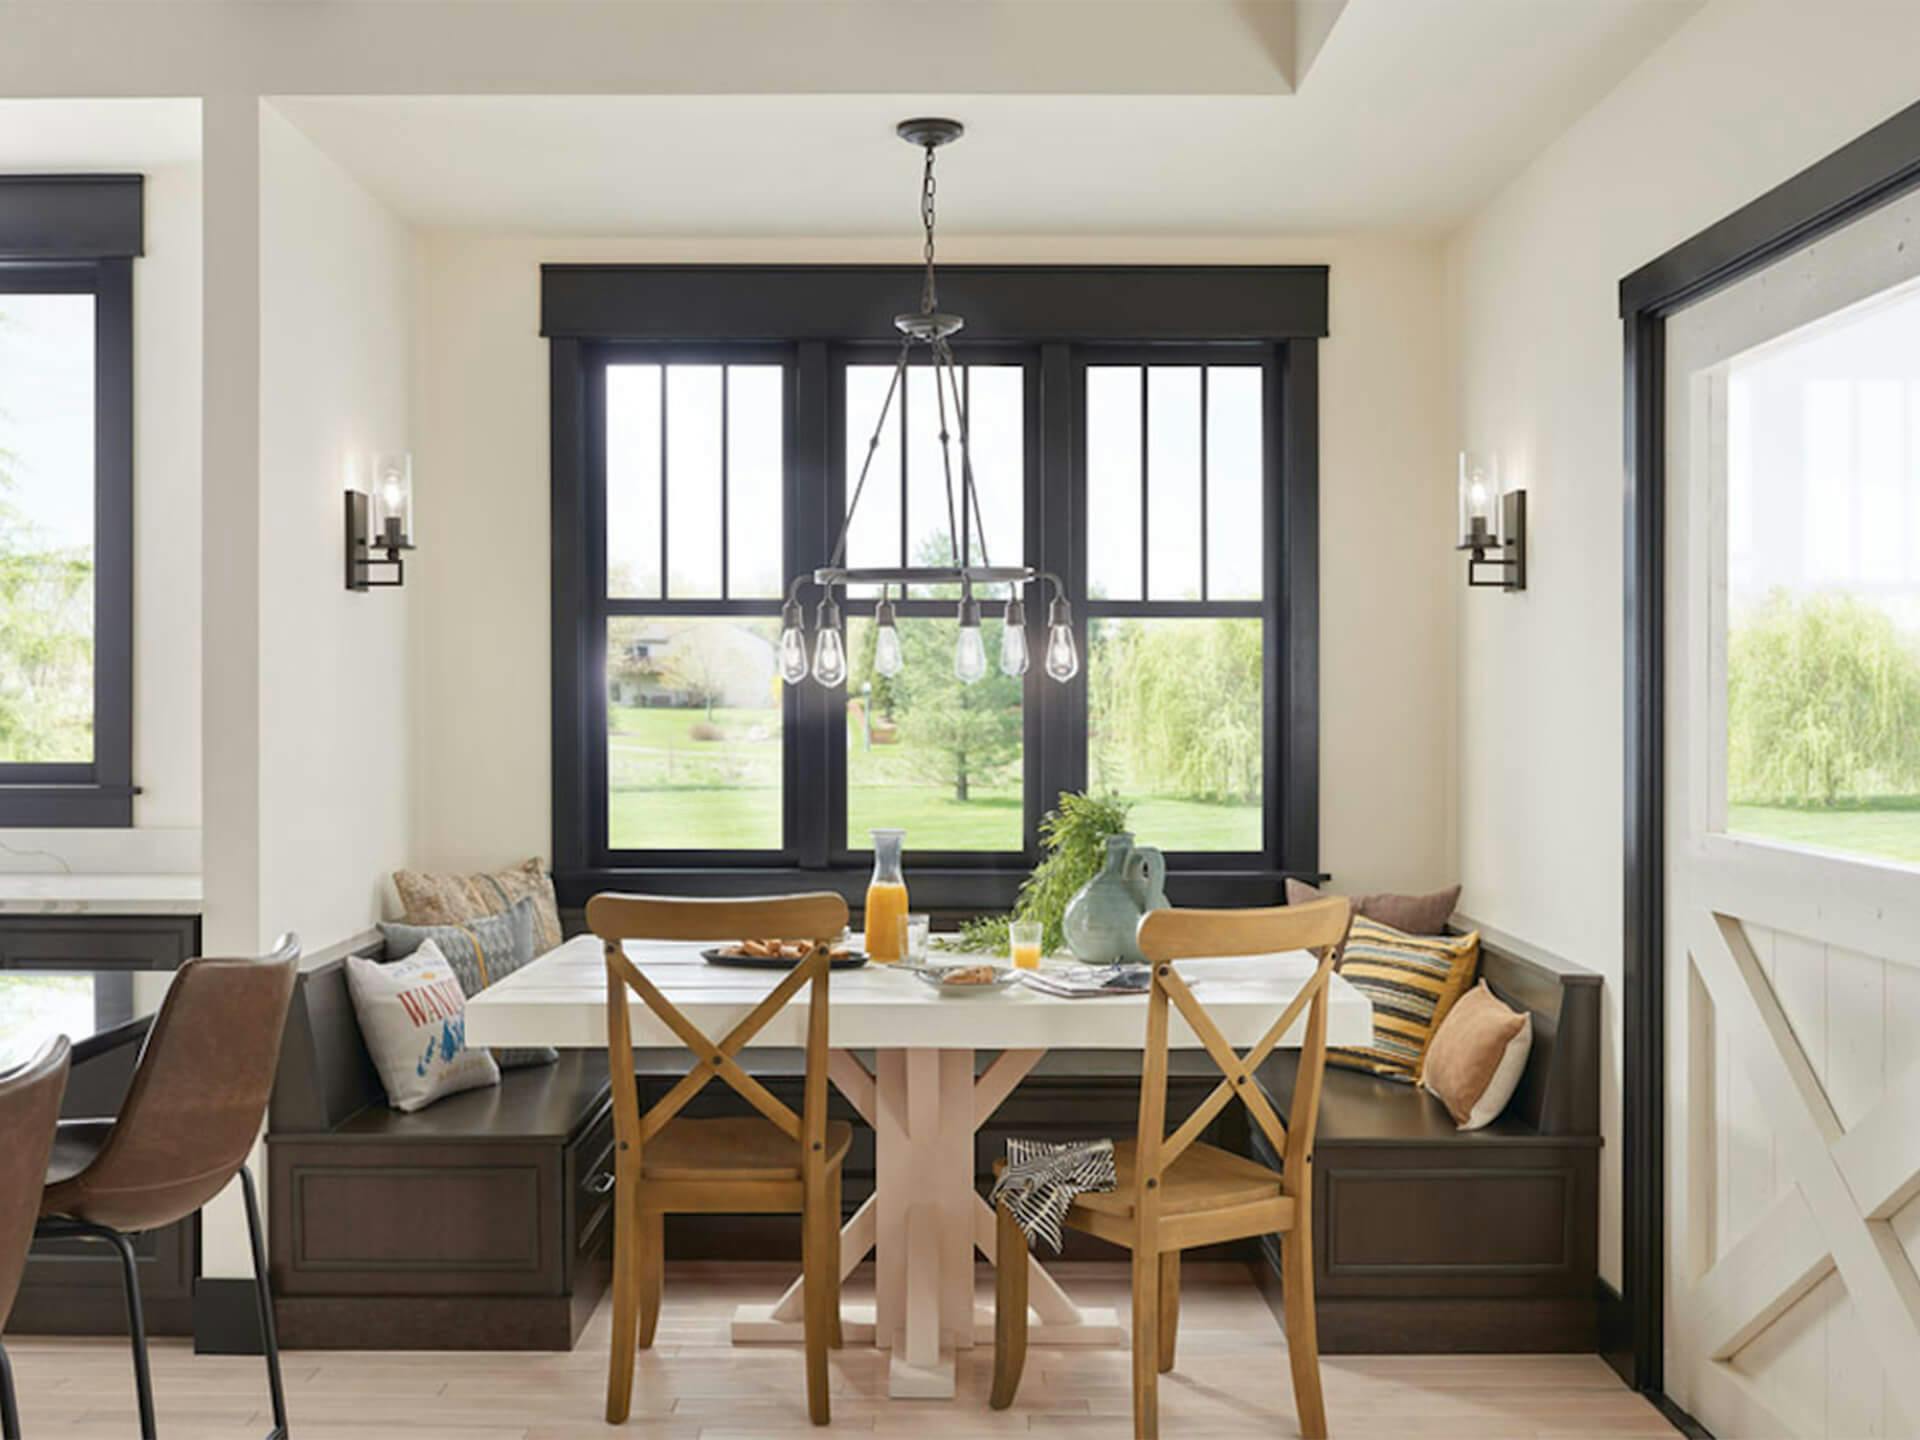 A breakfast nook with an Olde Bronze Lucien Chandelier above a table turned on in the daytime